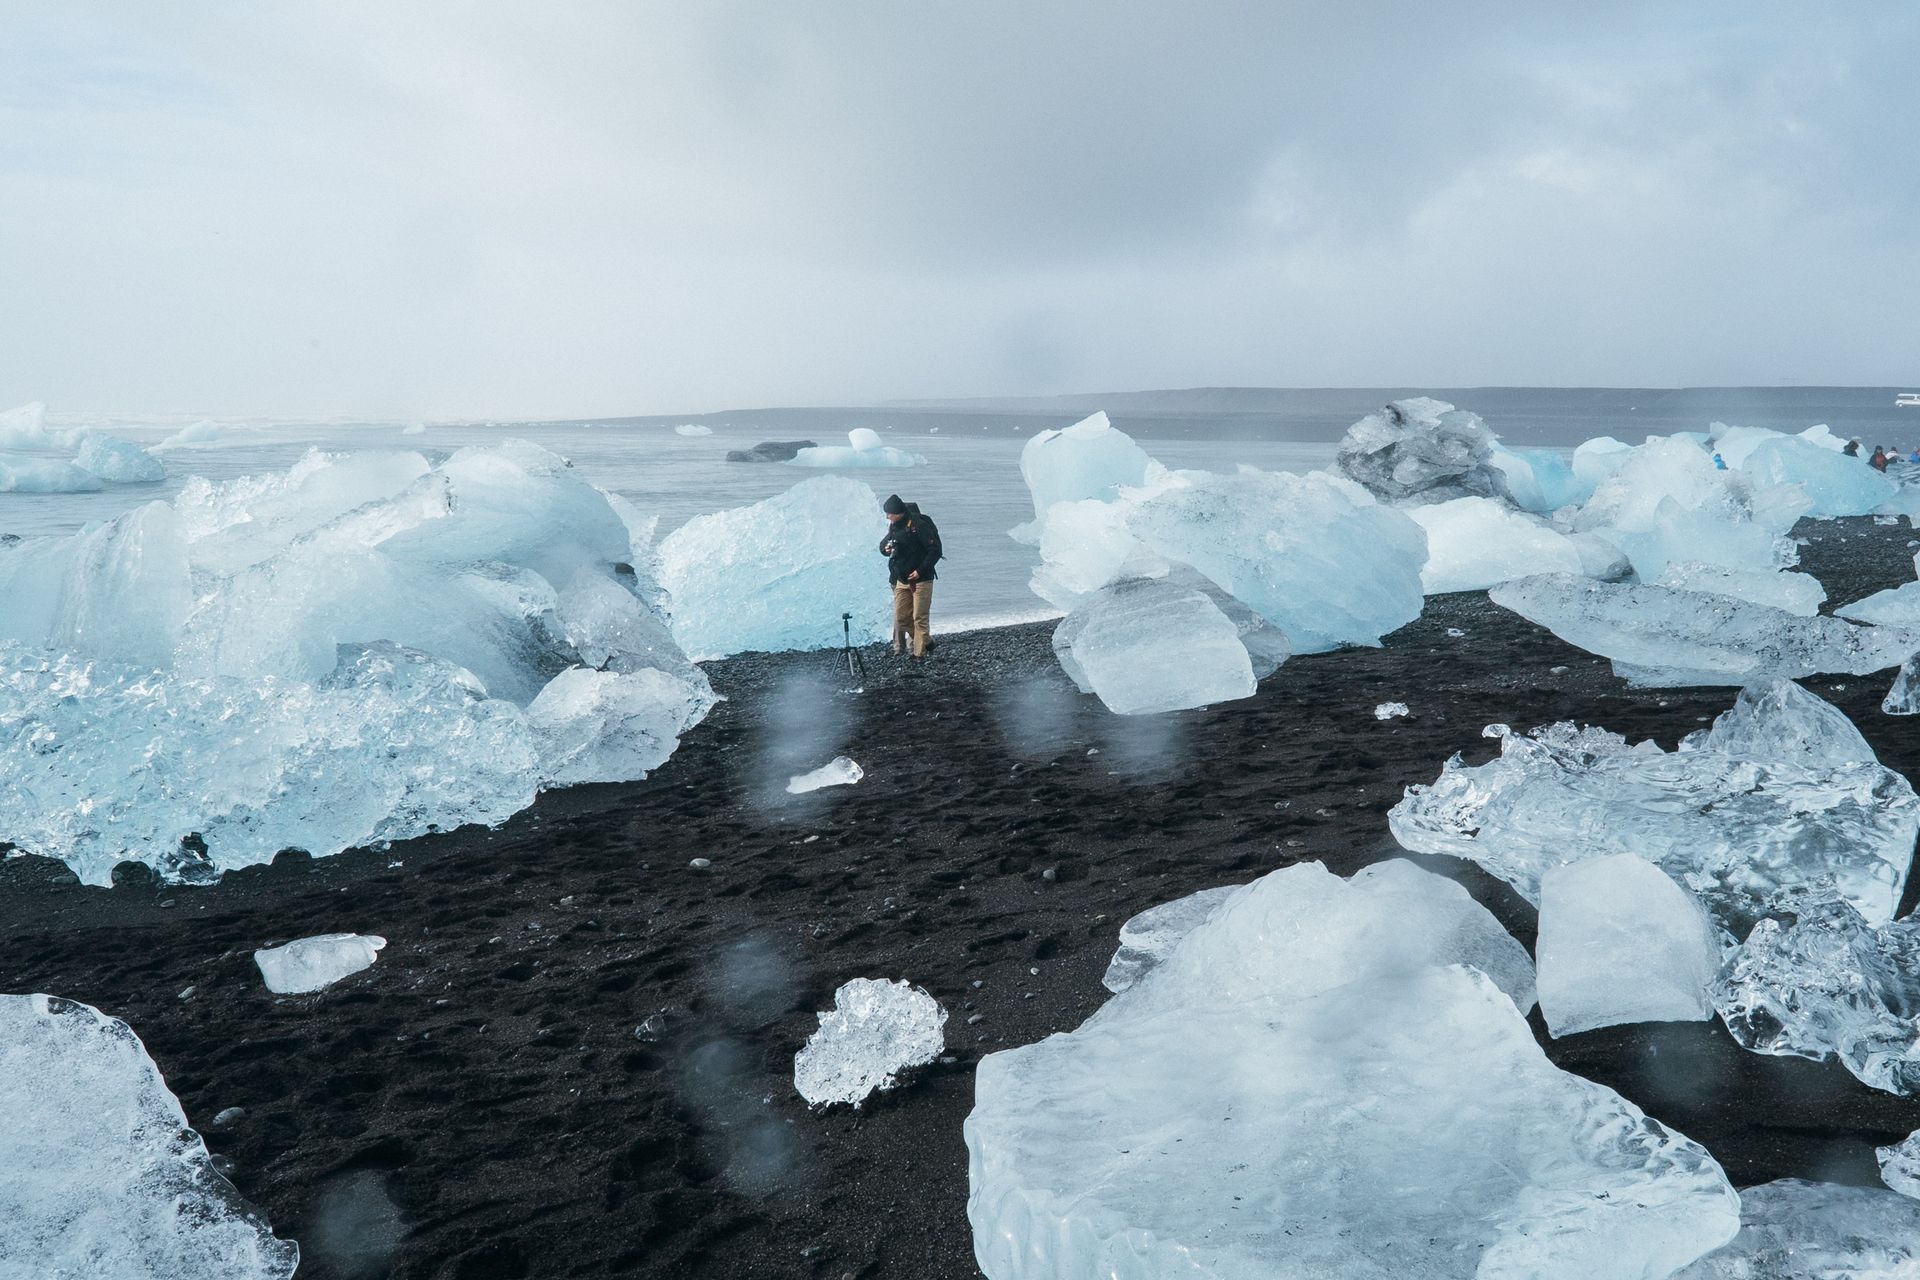 A man walks along the glistening black sand shore of Diamond Beach in Iceland, surrounded by glittering ice chunks scattered along the beach.